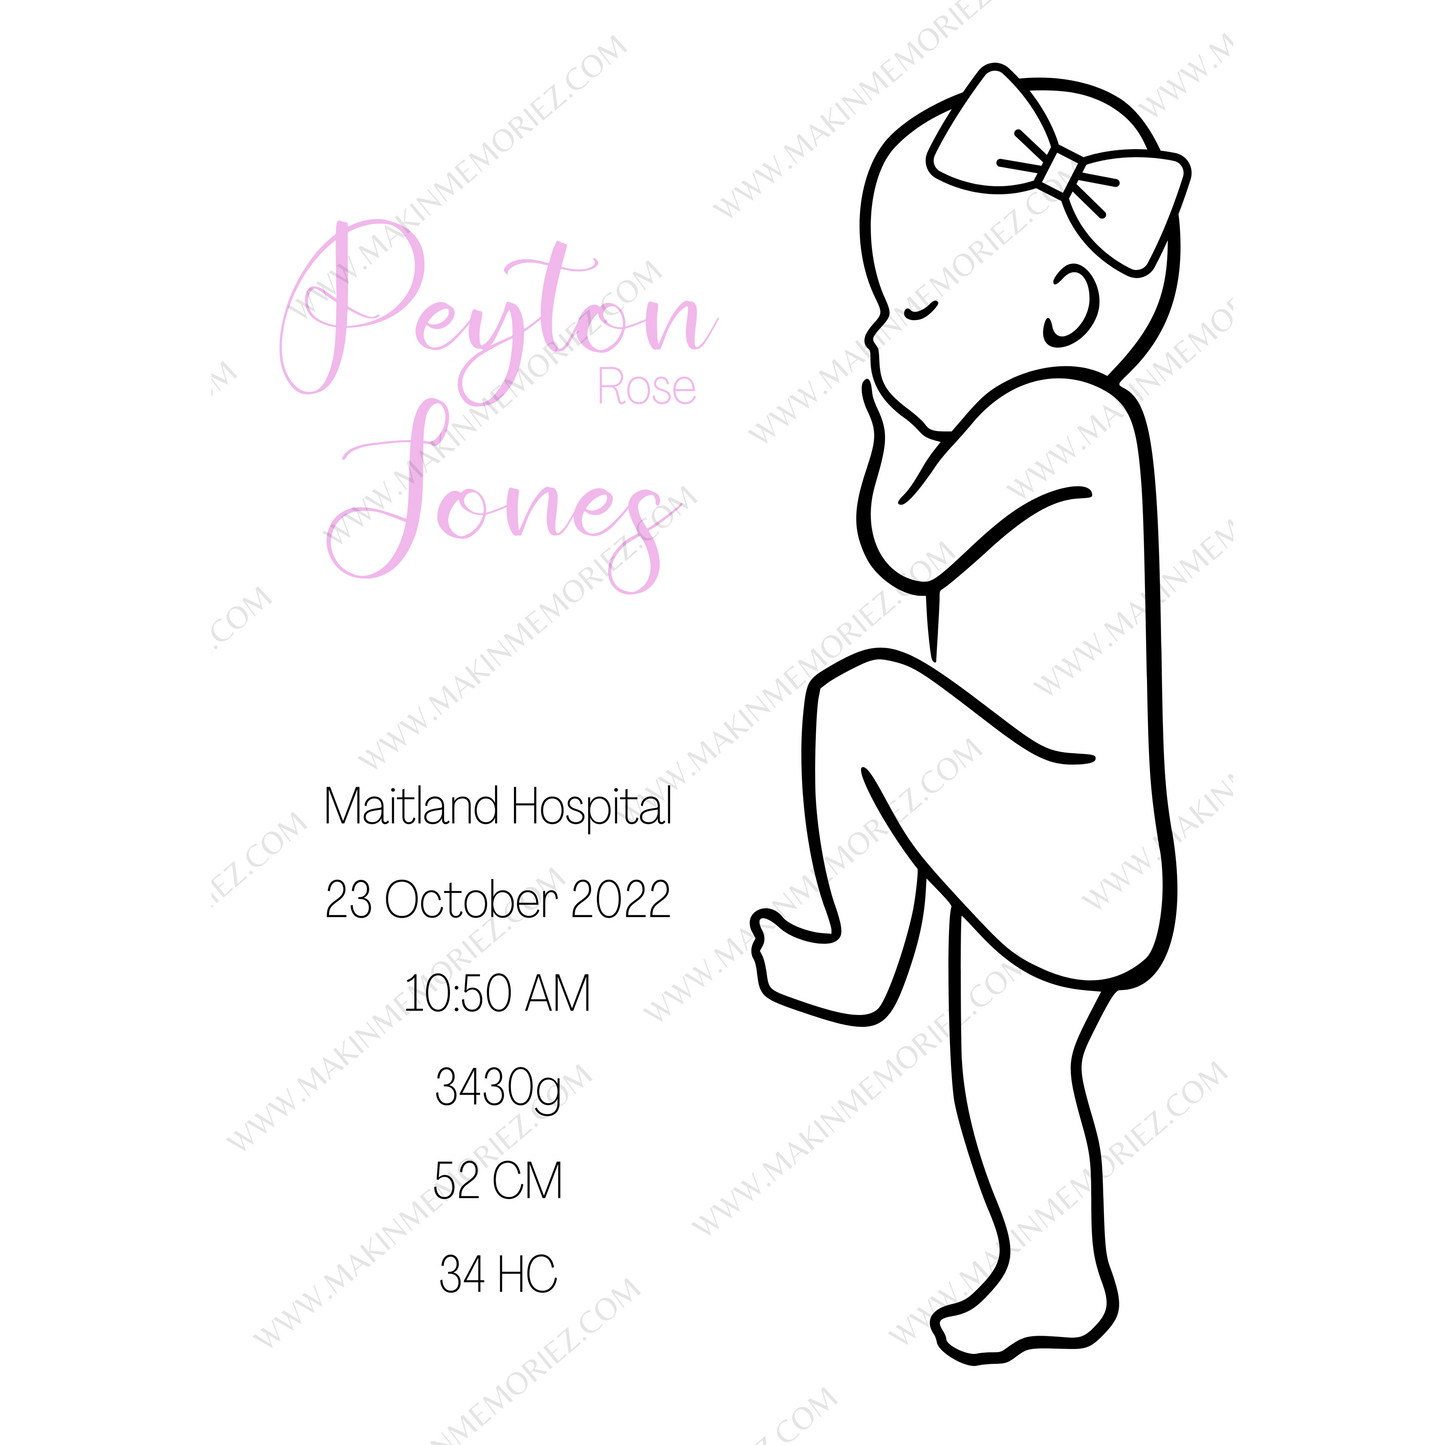 Custom Line Drawing of YOUR Baby, Newborn Poster Scale 1:1, Personalized to  Babys Actual Birth Size, Birth Poster of Newborn Length, Height 